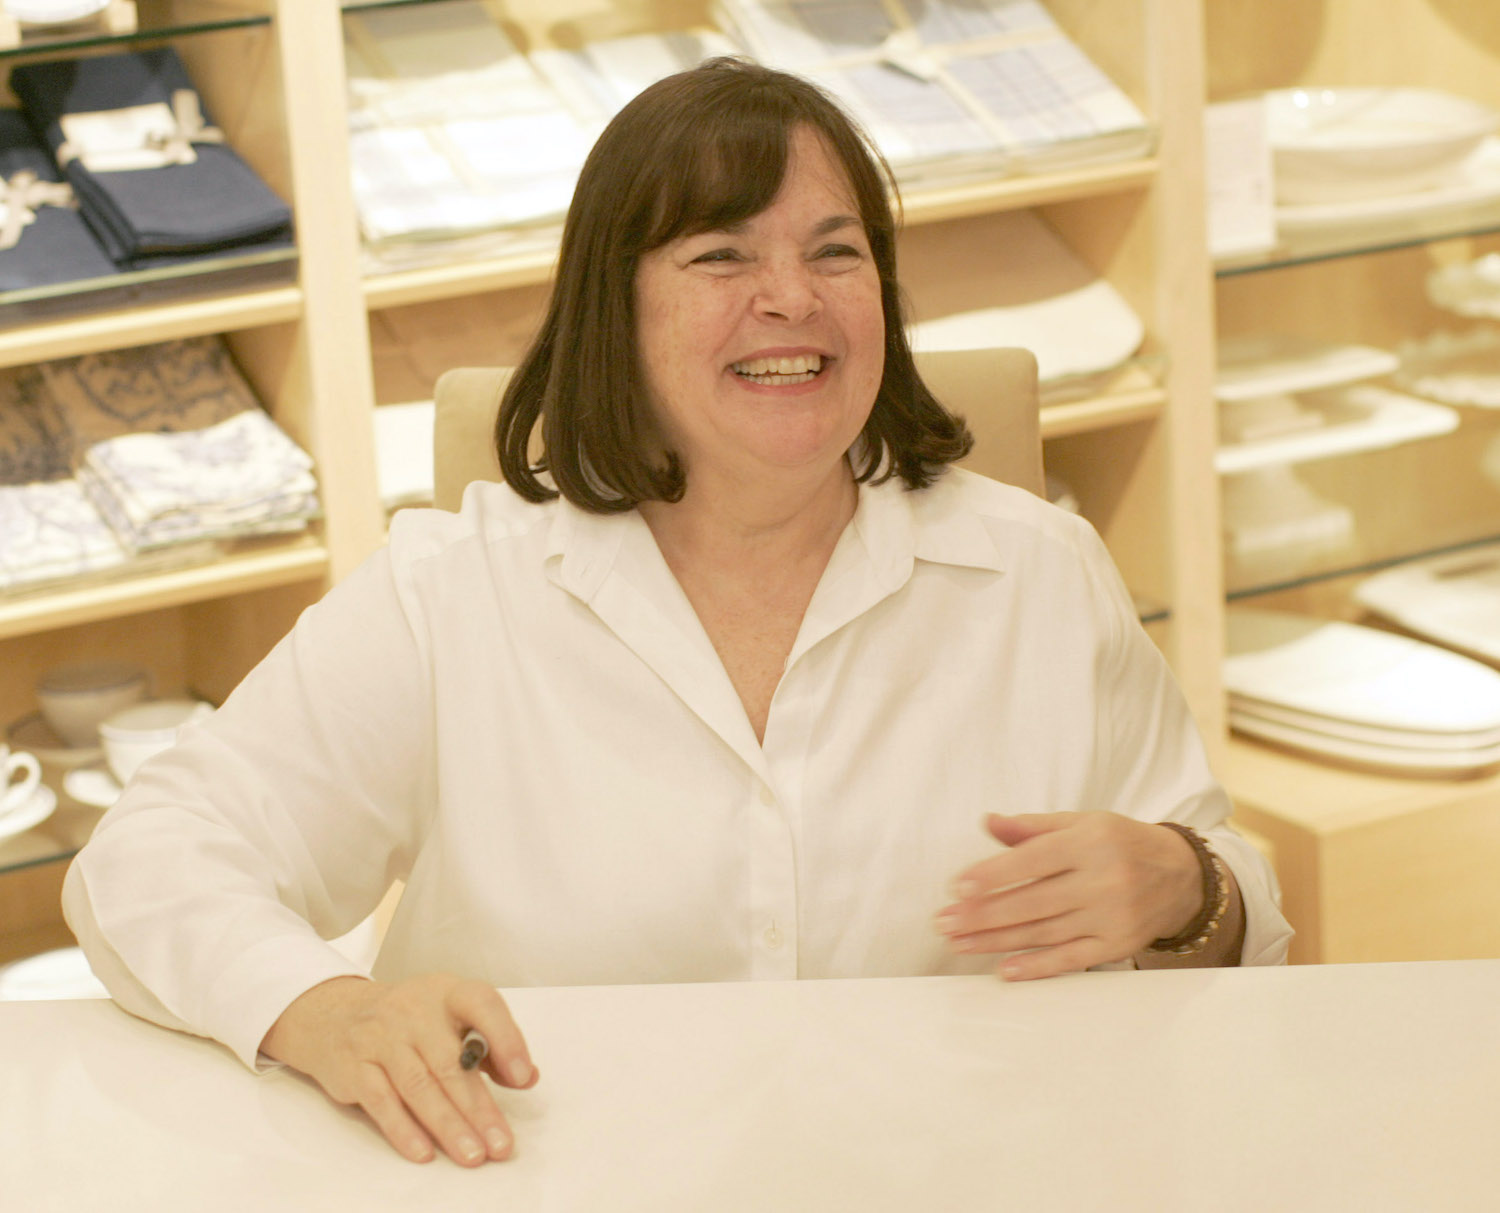 Ina Garten attends 'The Barefoot Contessa' book signing in 2008 